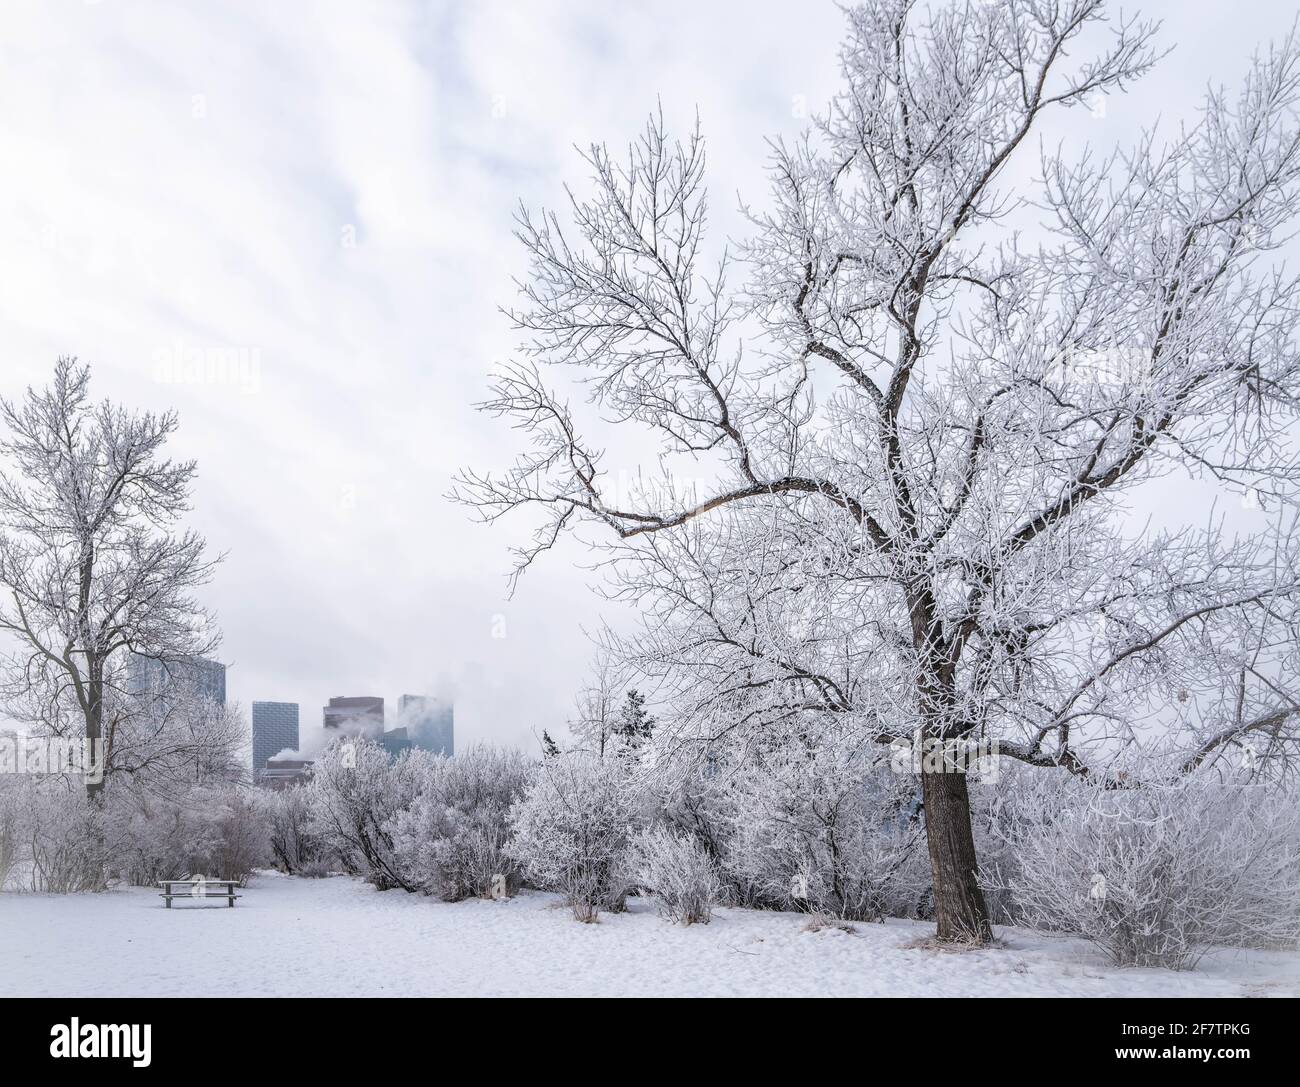 Landscape of city park in winter with frozen trees Stock Photo